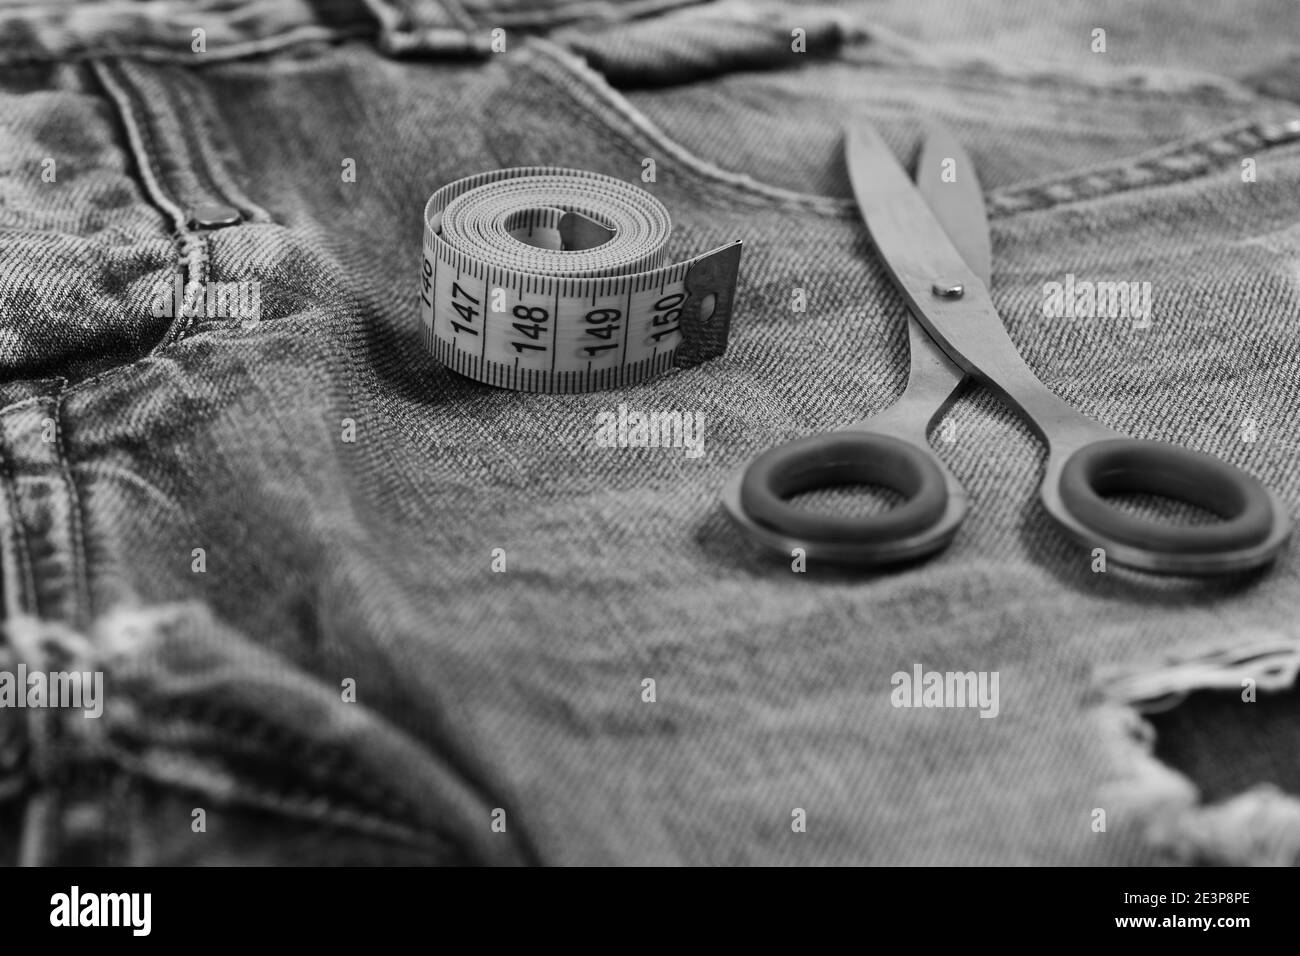 Tailors tools on denim fabric, selective focus. Making clothes and design concept. Jeans crotch and pocket, close up. Metal scissors and yellow measure tape on jeans. Stock Photo